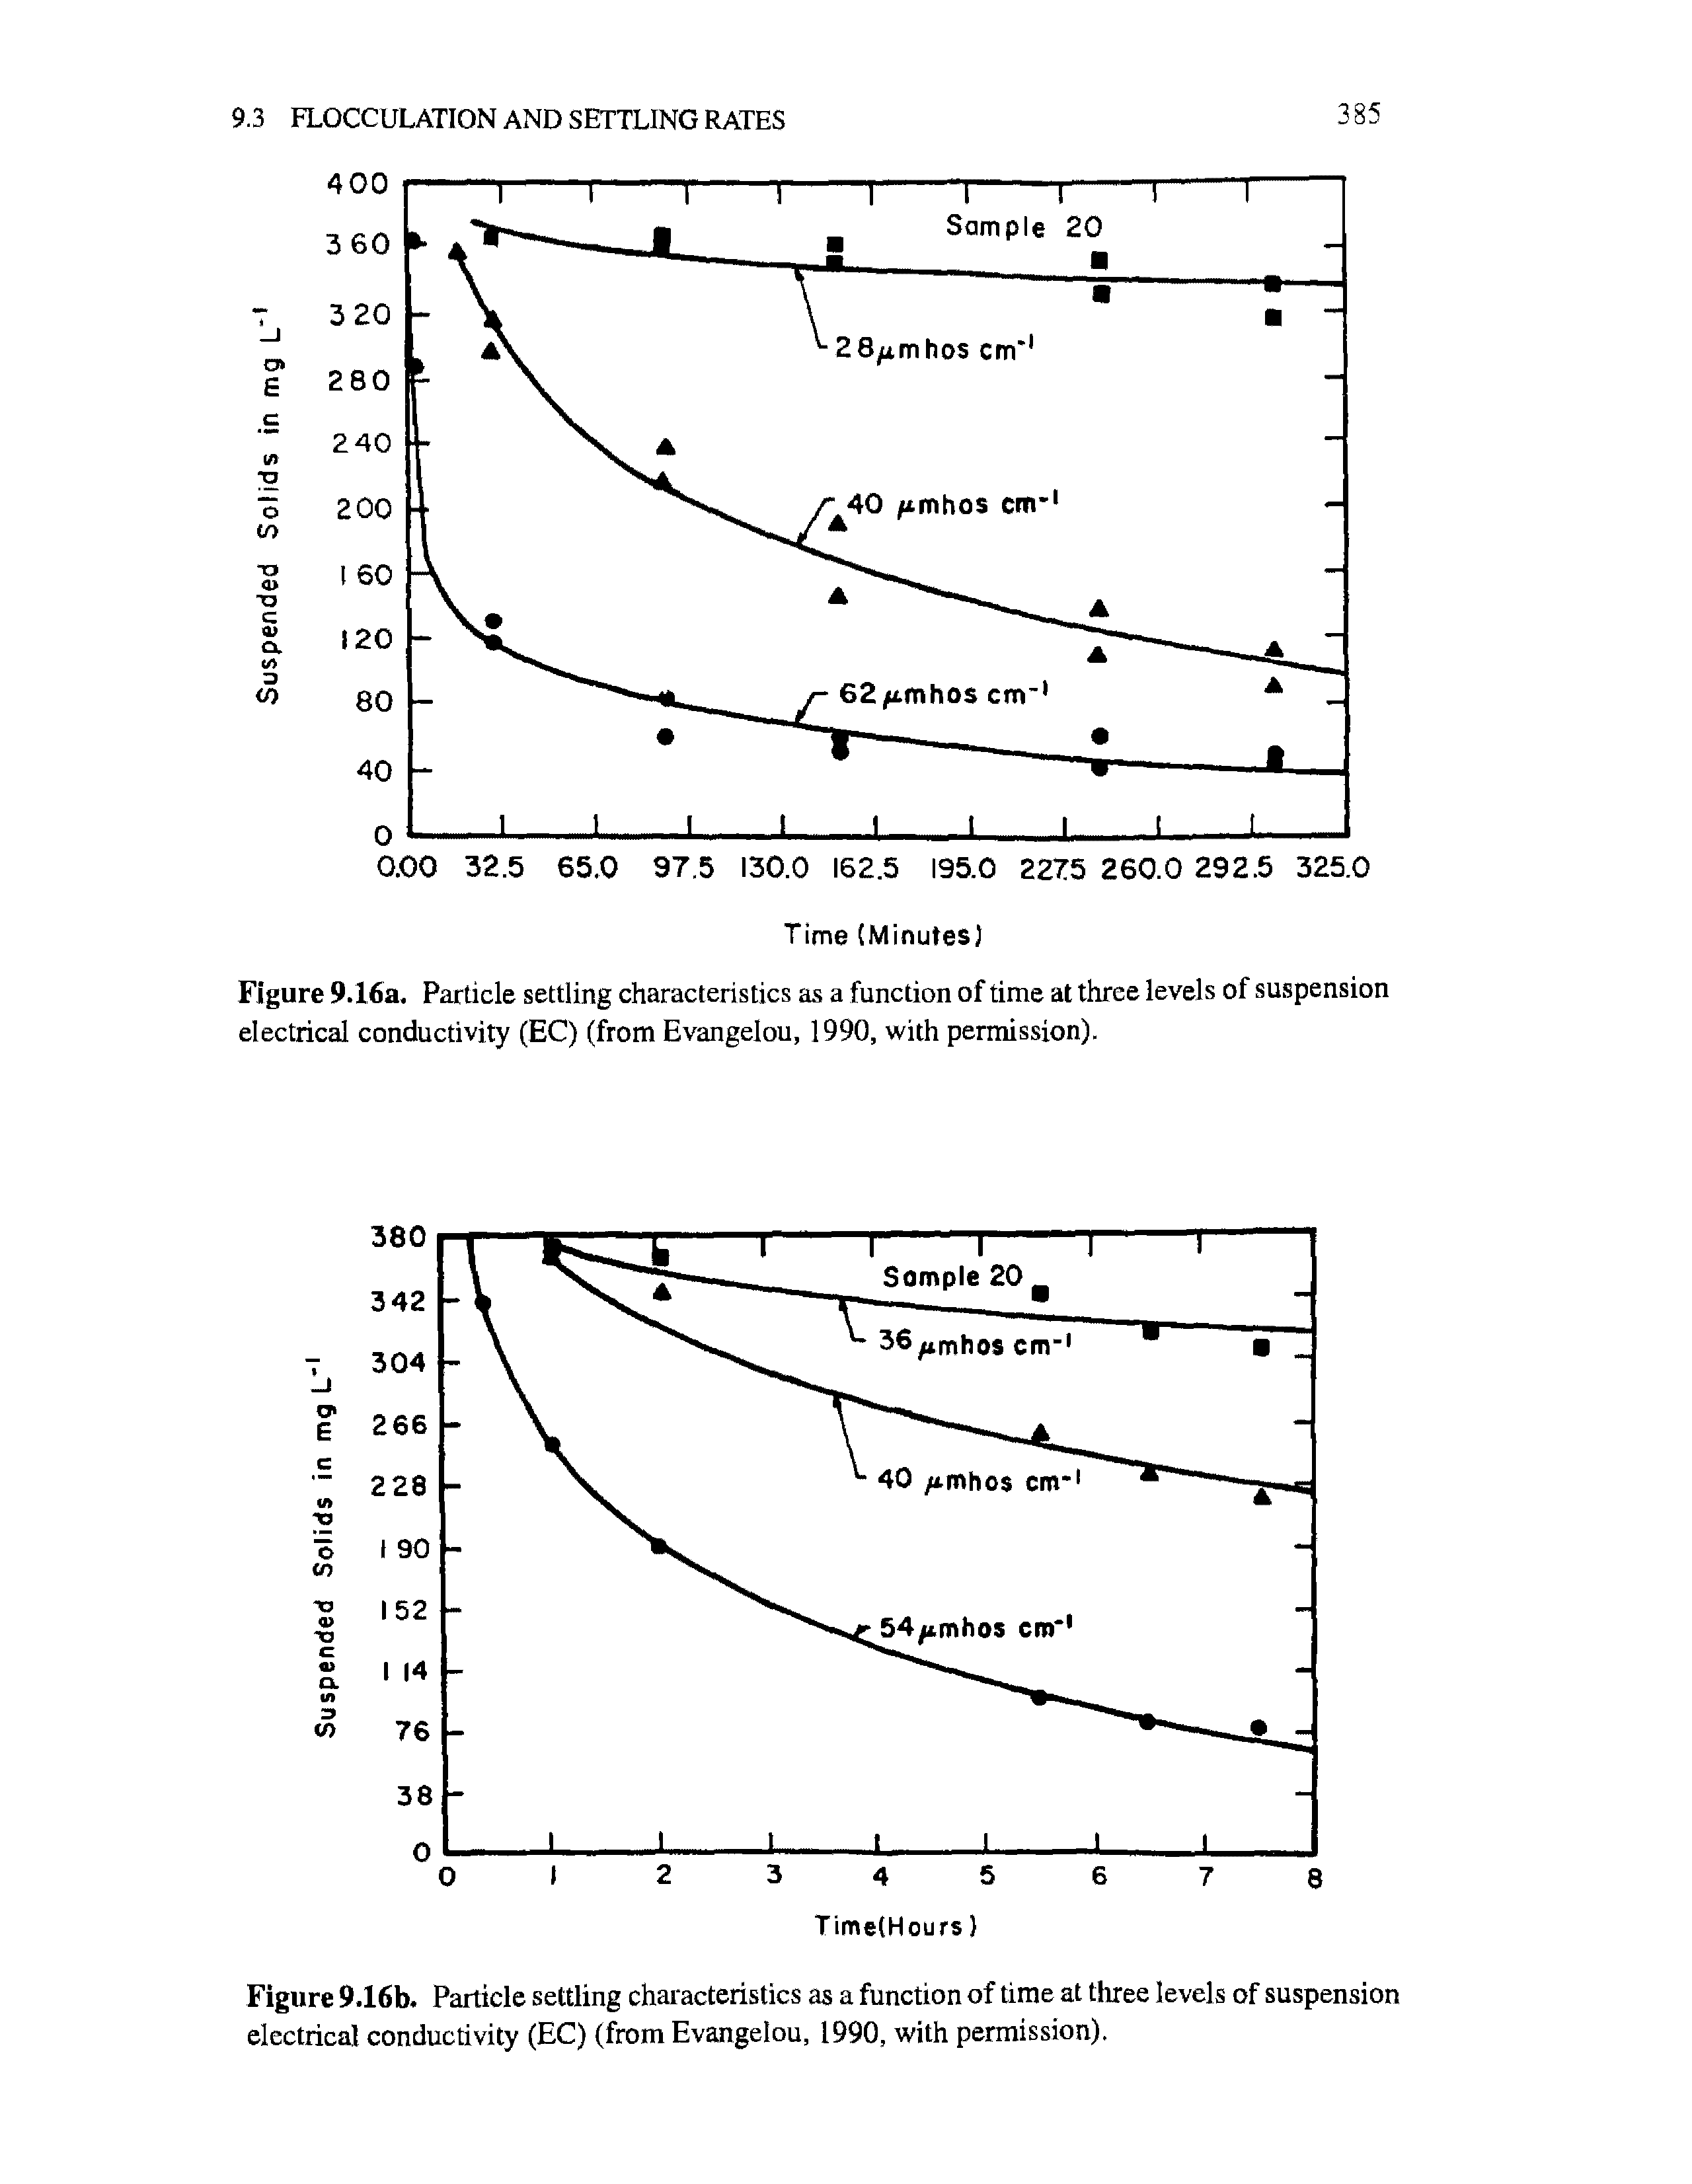 Figure 9.16a. Particle settling characteristics as a function of time at three levels of suspension electrical conductivity (EC) (from Evangelou, 1990, with permission).